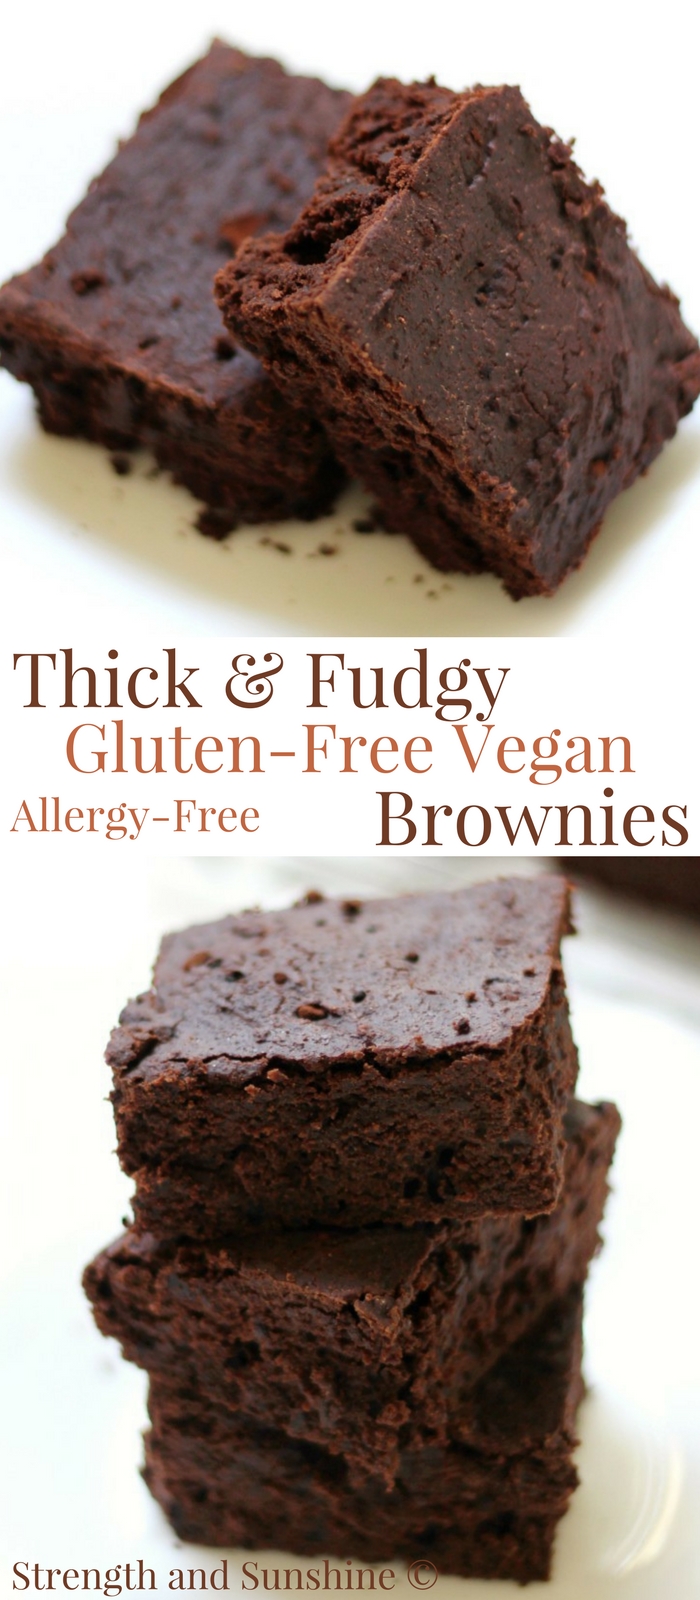 Easy Thick & Fudgy One-Bowl Gluten-Free Vegan Brownies (Allergy-Free) A quick & easy recipe for classic Thick & Fudgy One-Bowl Gluten-Free Vegan Brownies! A top 8 allergy-free, oil-free, and sugar-free swap for your favorite rich and decadent chocolate dessert! Kid and mom approved for any party or celebration! #brownies #glutenfree #vegan #allergyfree #dessert #strengthandsunshine